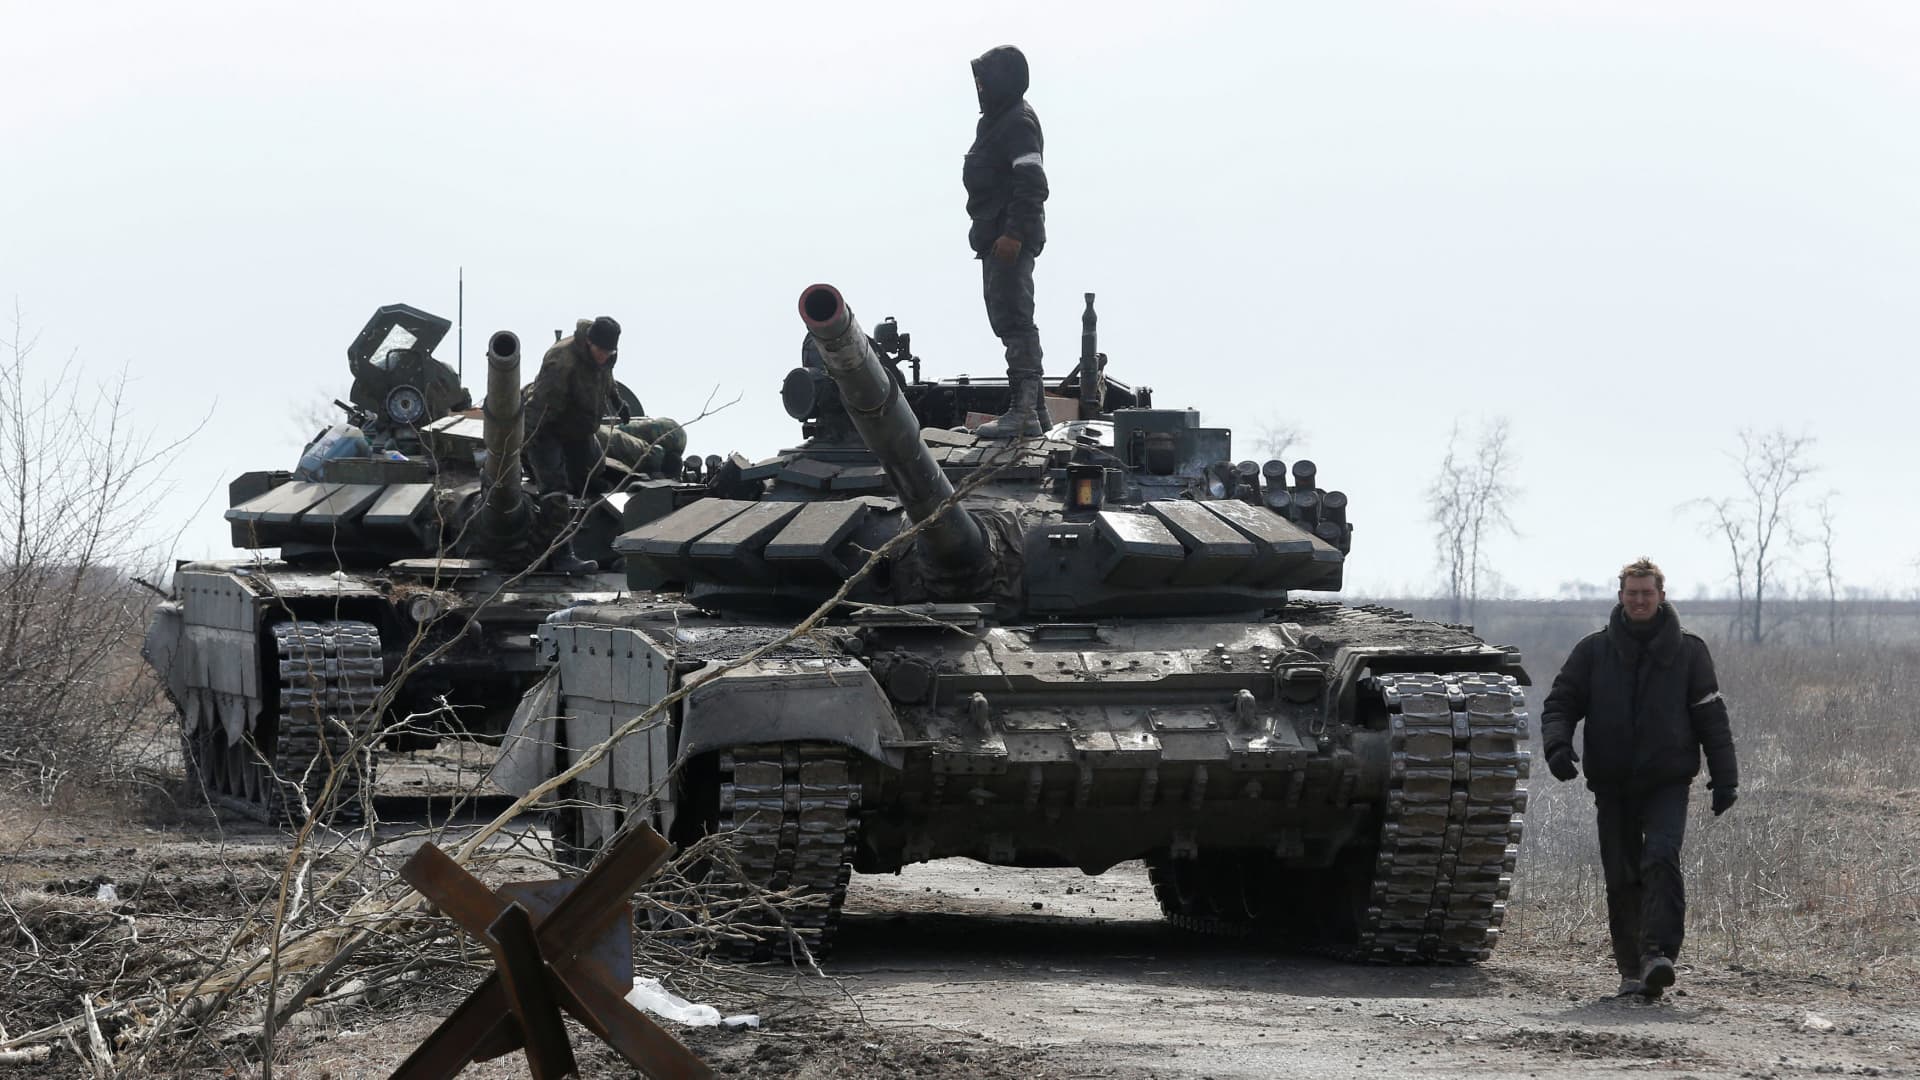 Service members of pro-Russian troops are seen atop of tanks during Ukraine-Russia conflict on the outskirts of the besieged southern port city of Mariupol, Ukraine March 20, 2022. 